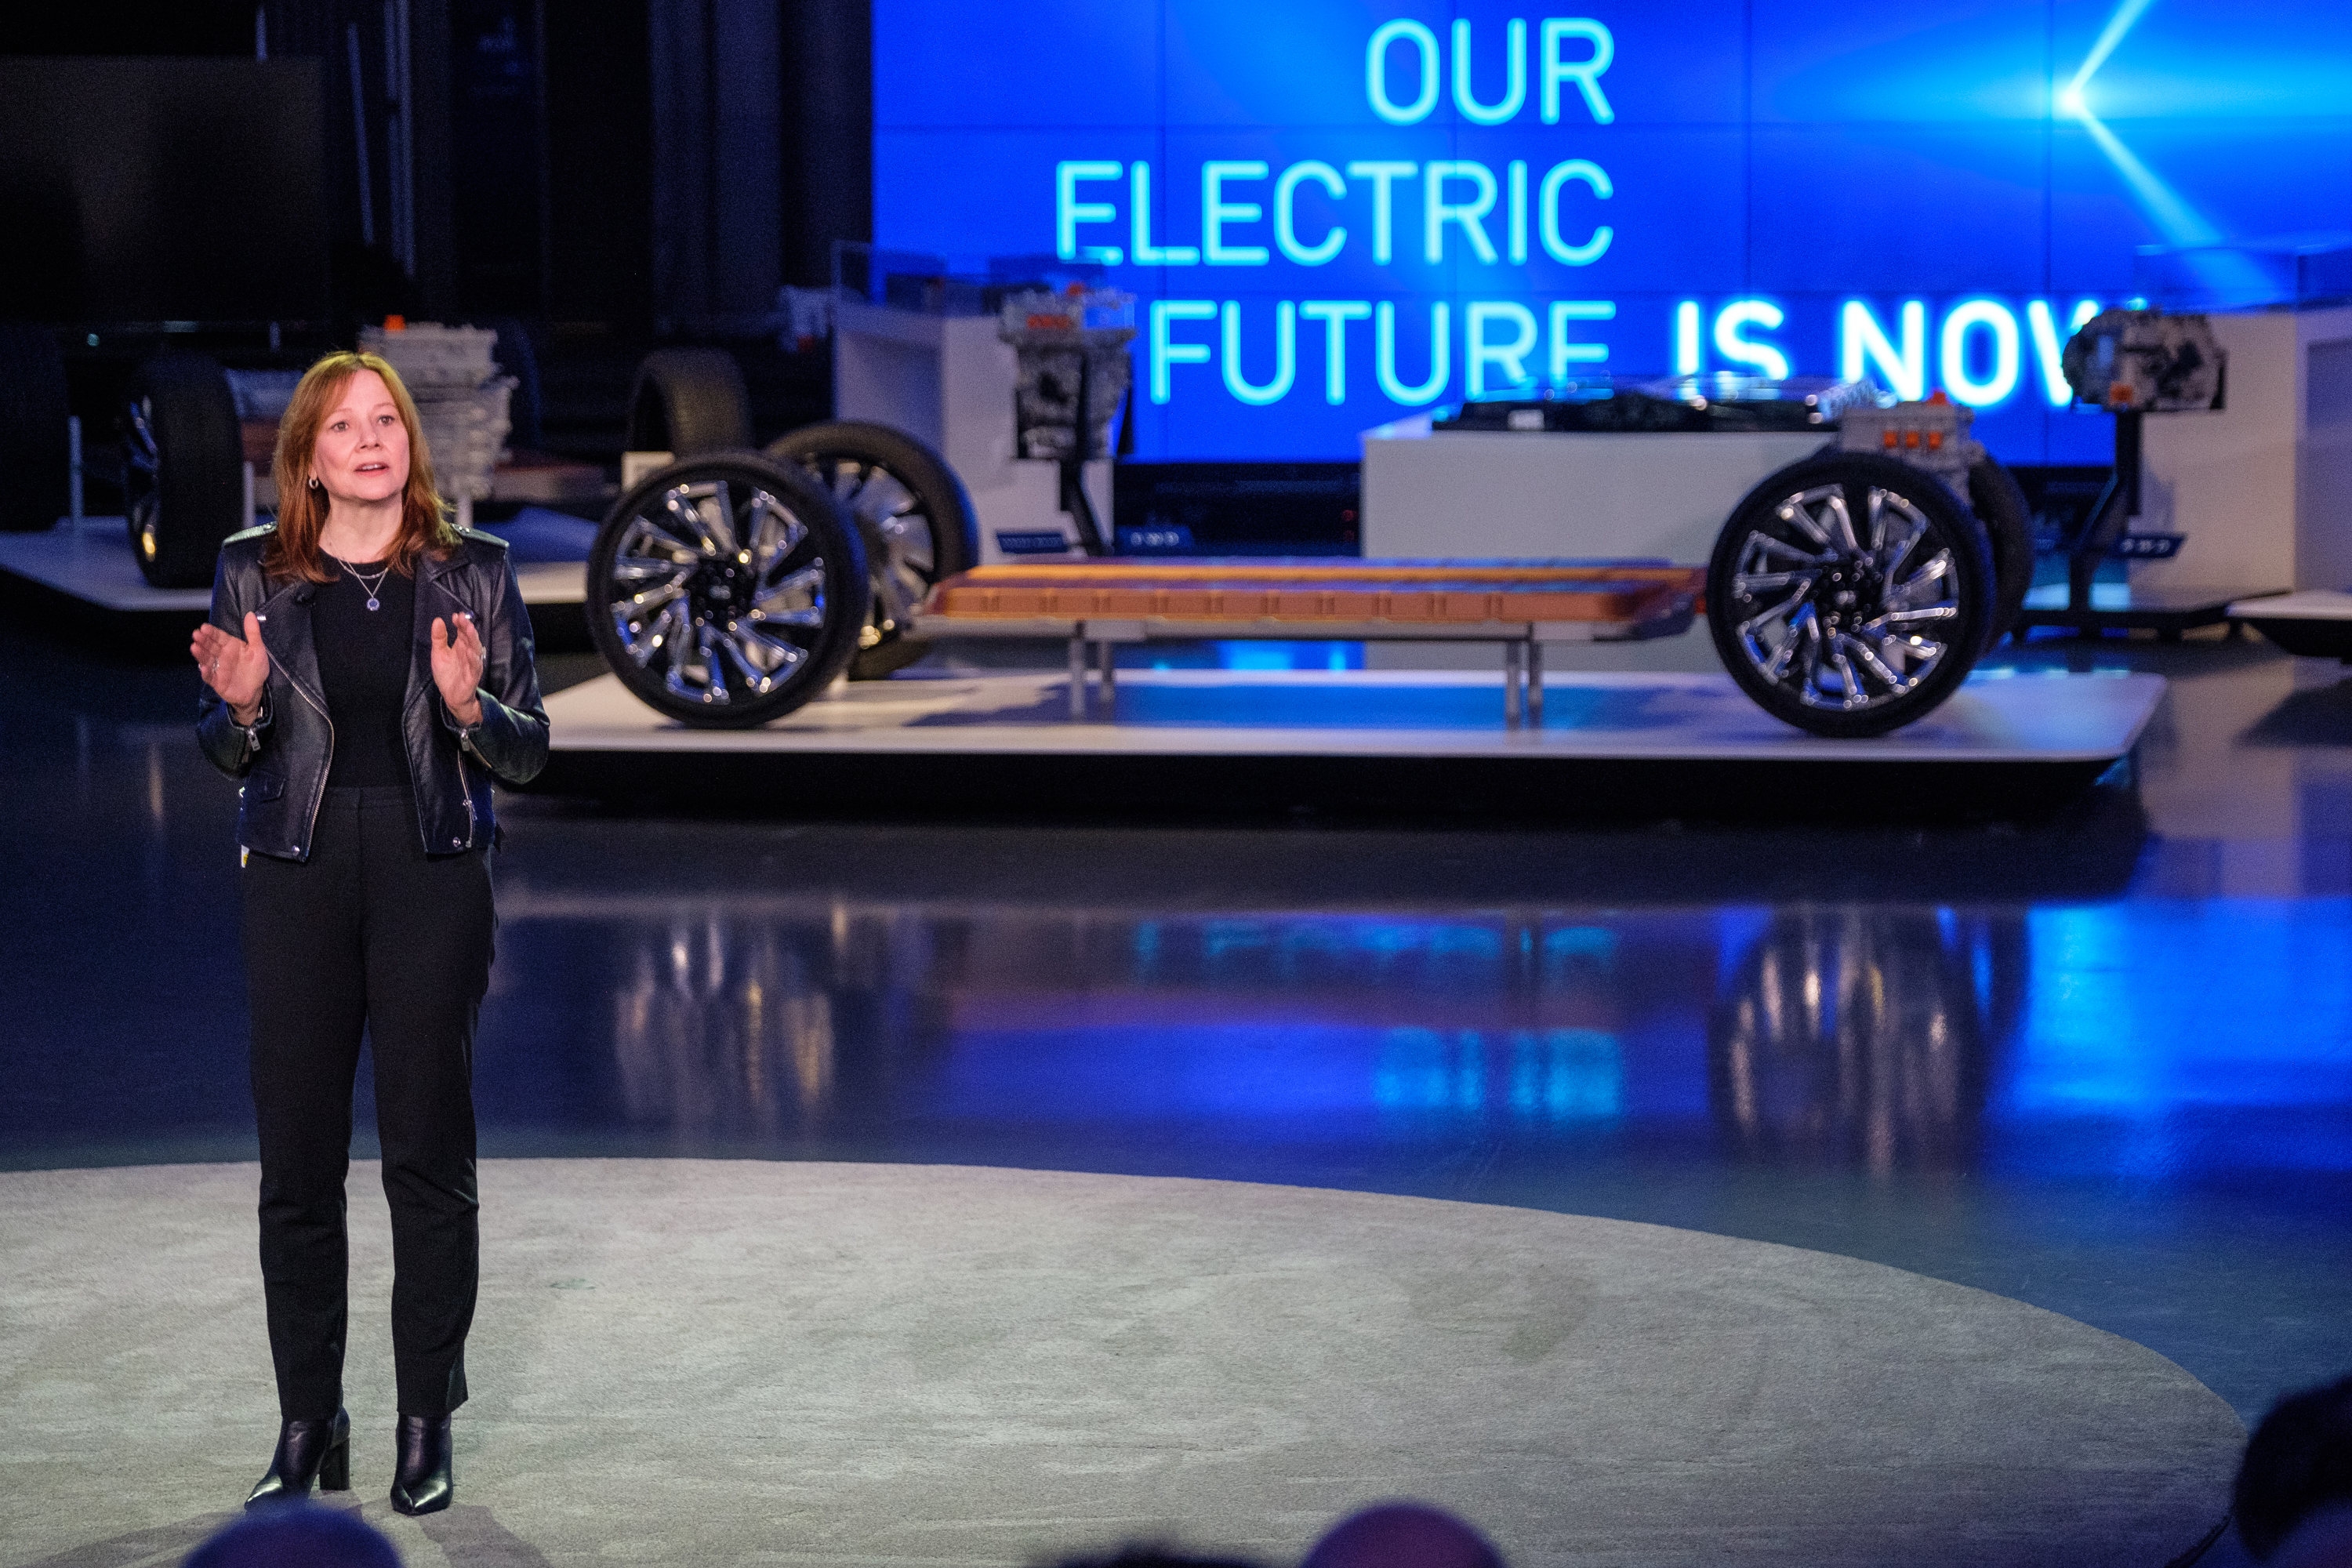 GM Expects All Of Their Operations to be Carbon Neutral by 2040